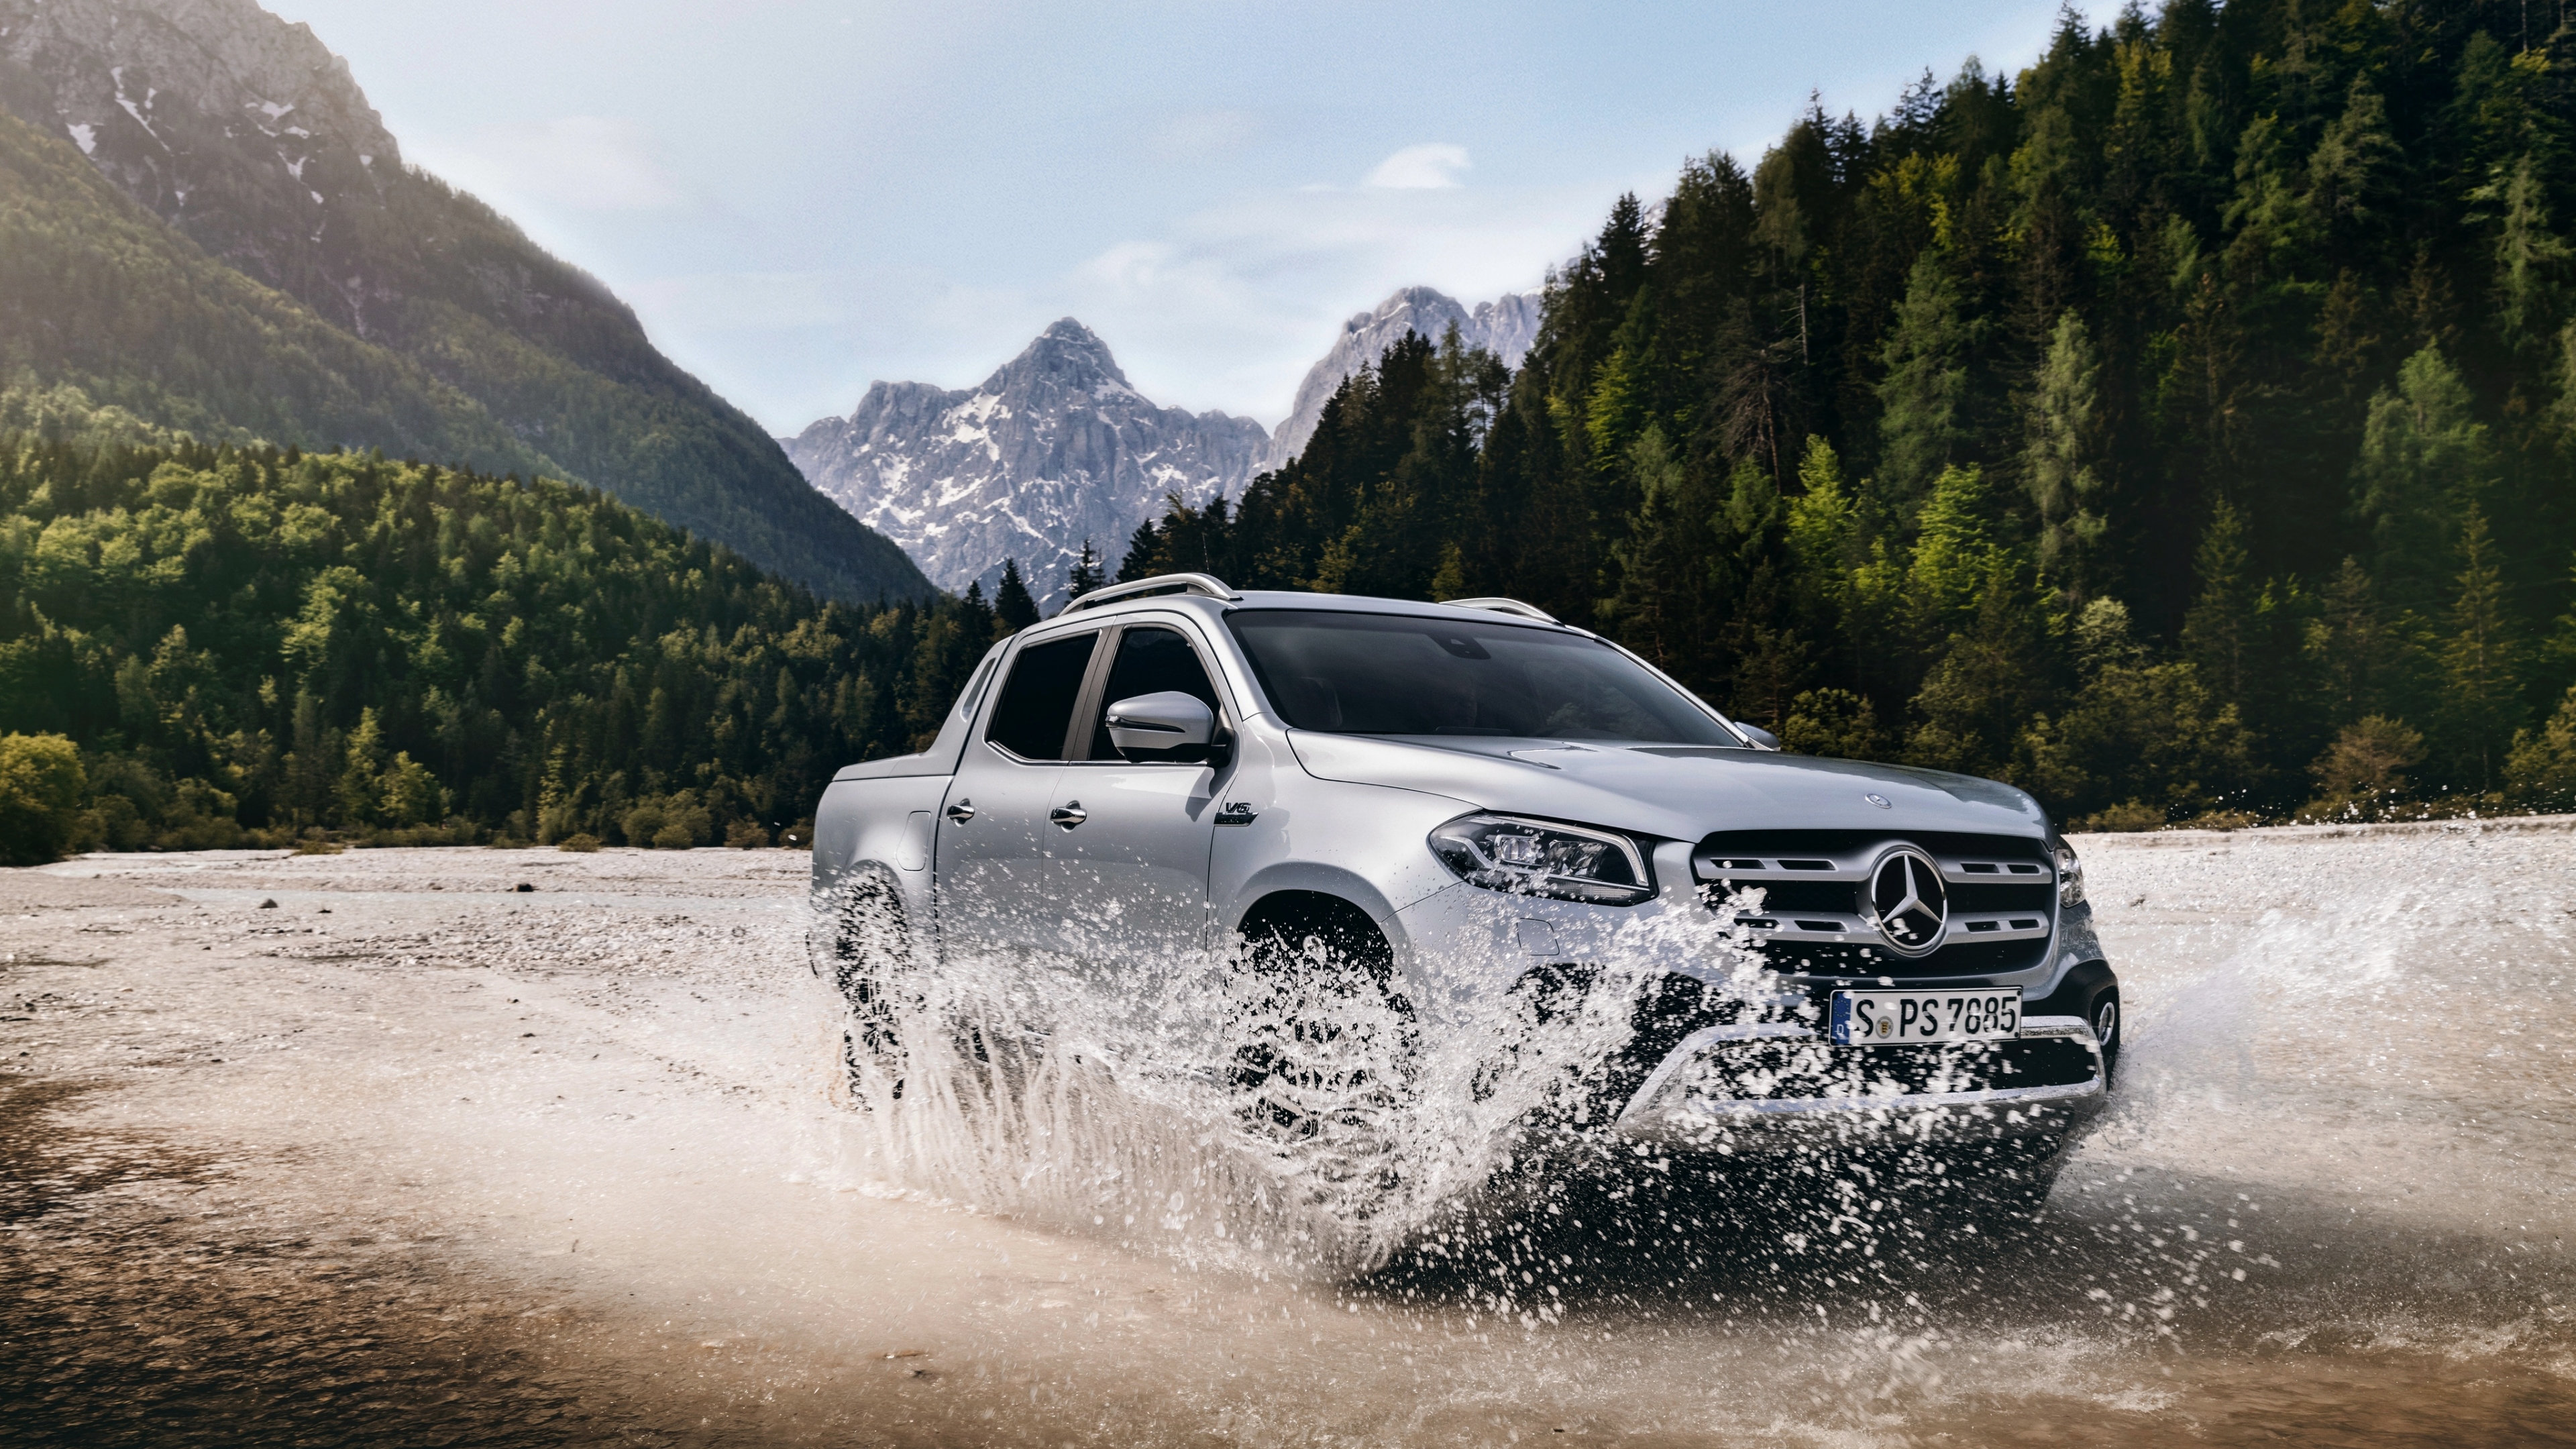 Nature Mountains Vehicle Mercedes Benz Off Road 3840x2160